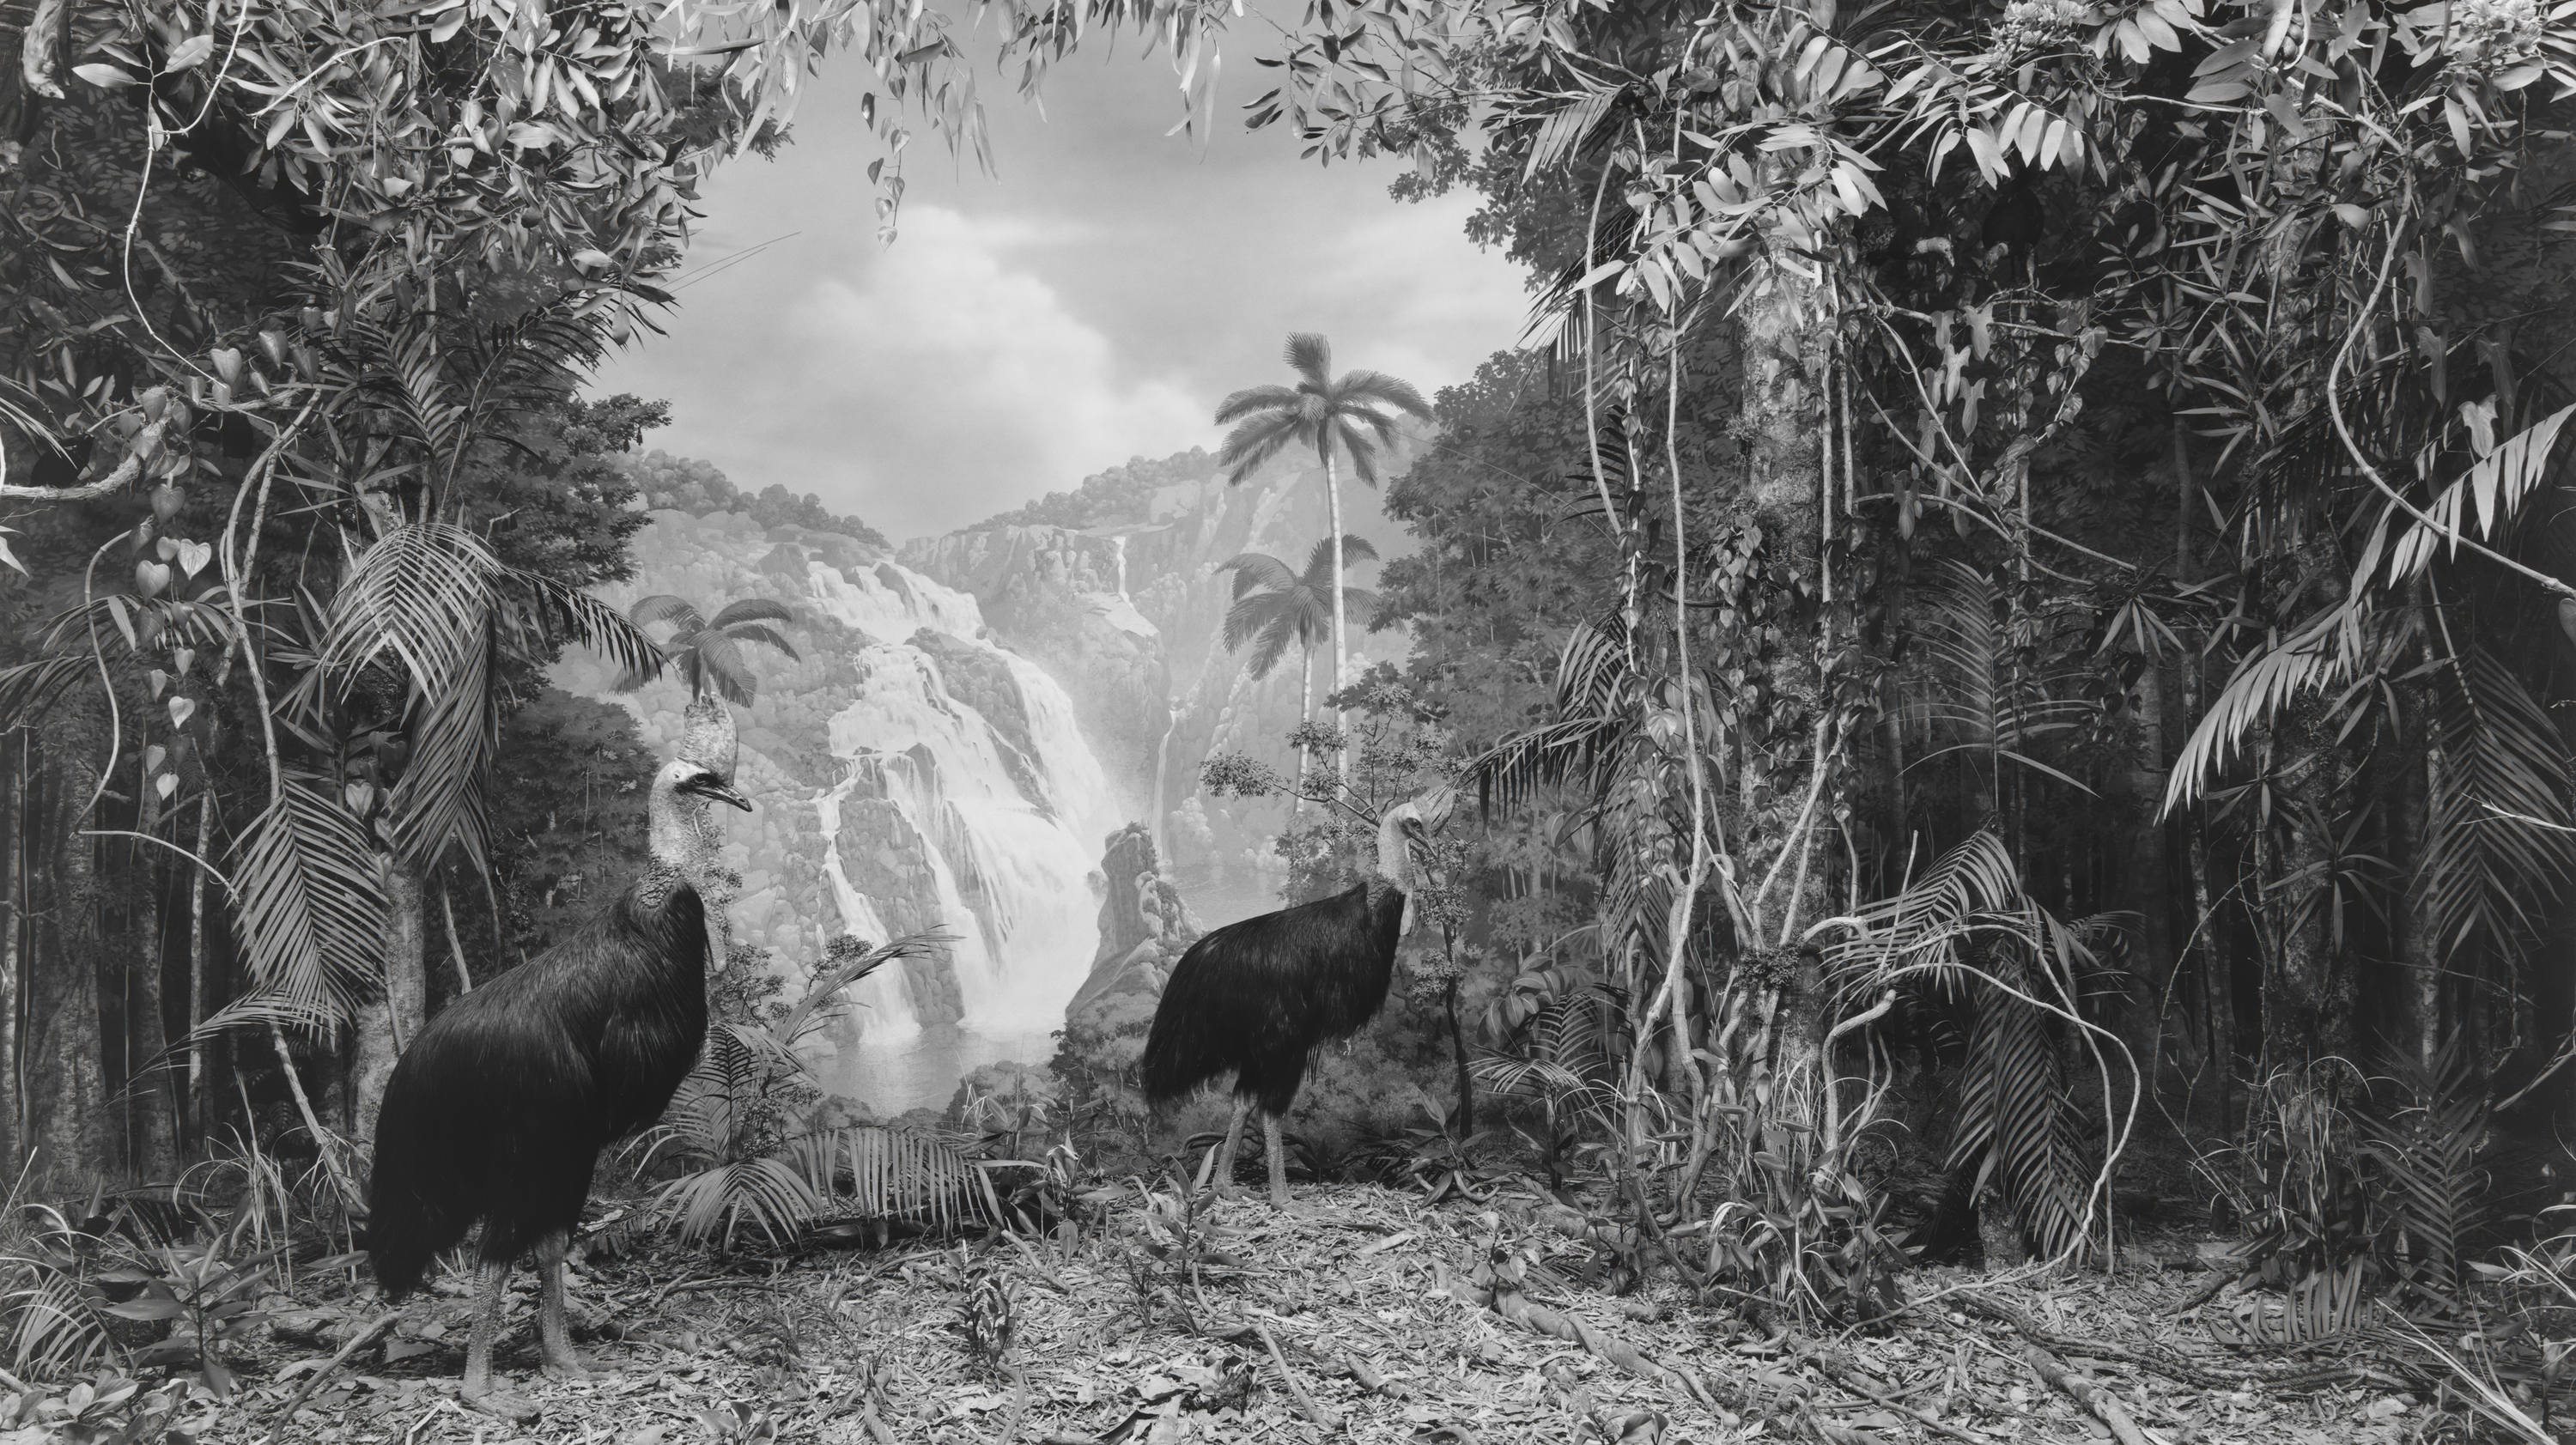 Black and white photograph of a life size diorama of two cassowaries in a tropical setting with waterfall